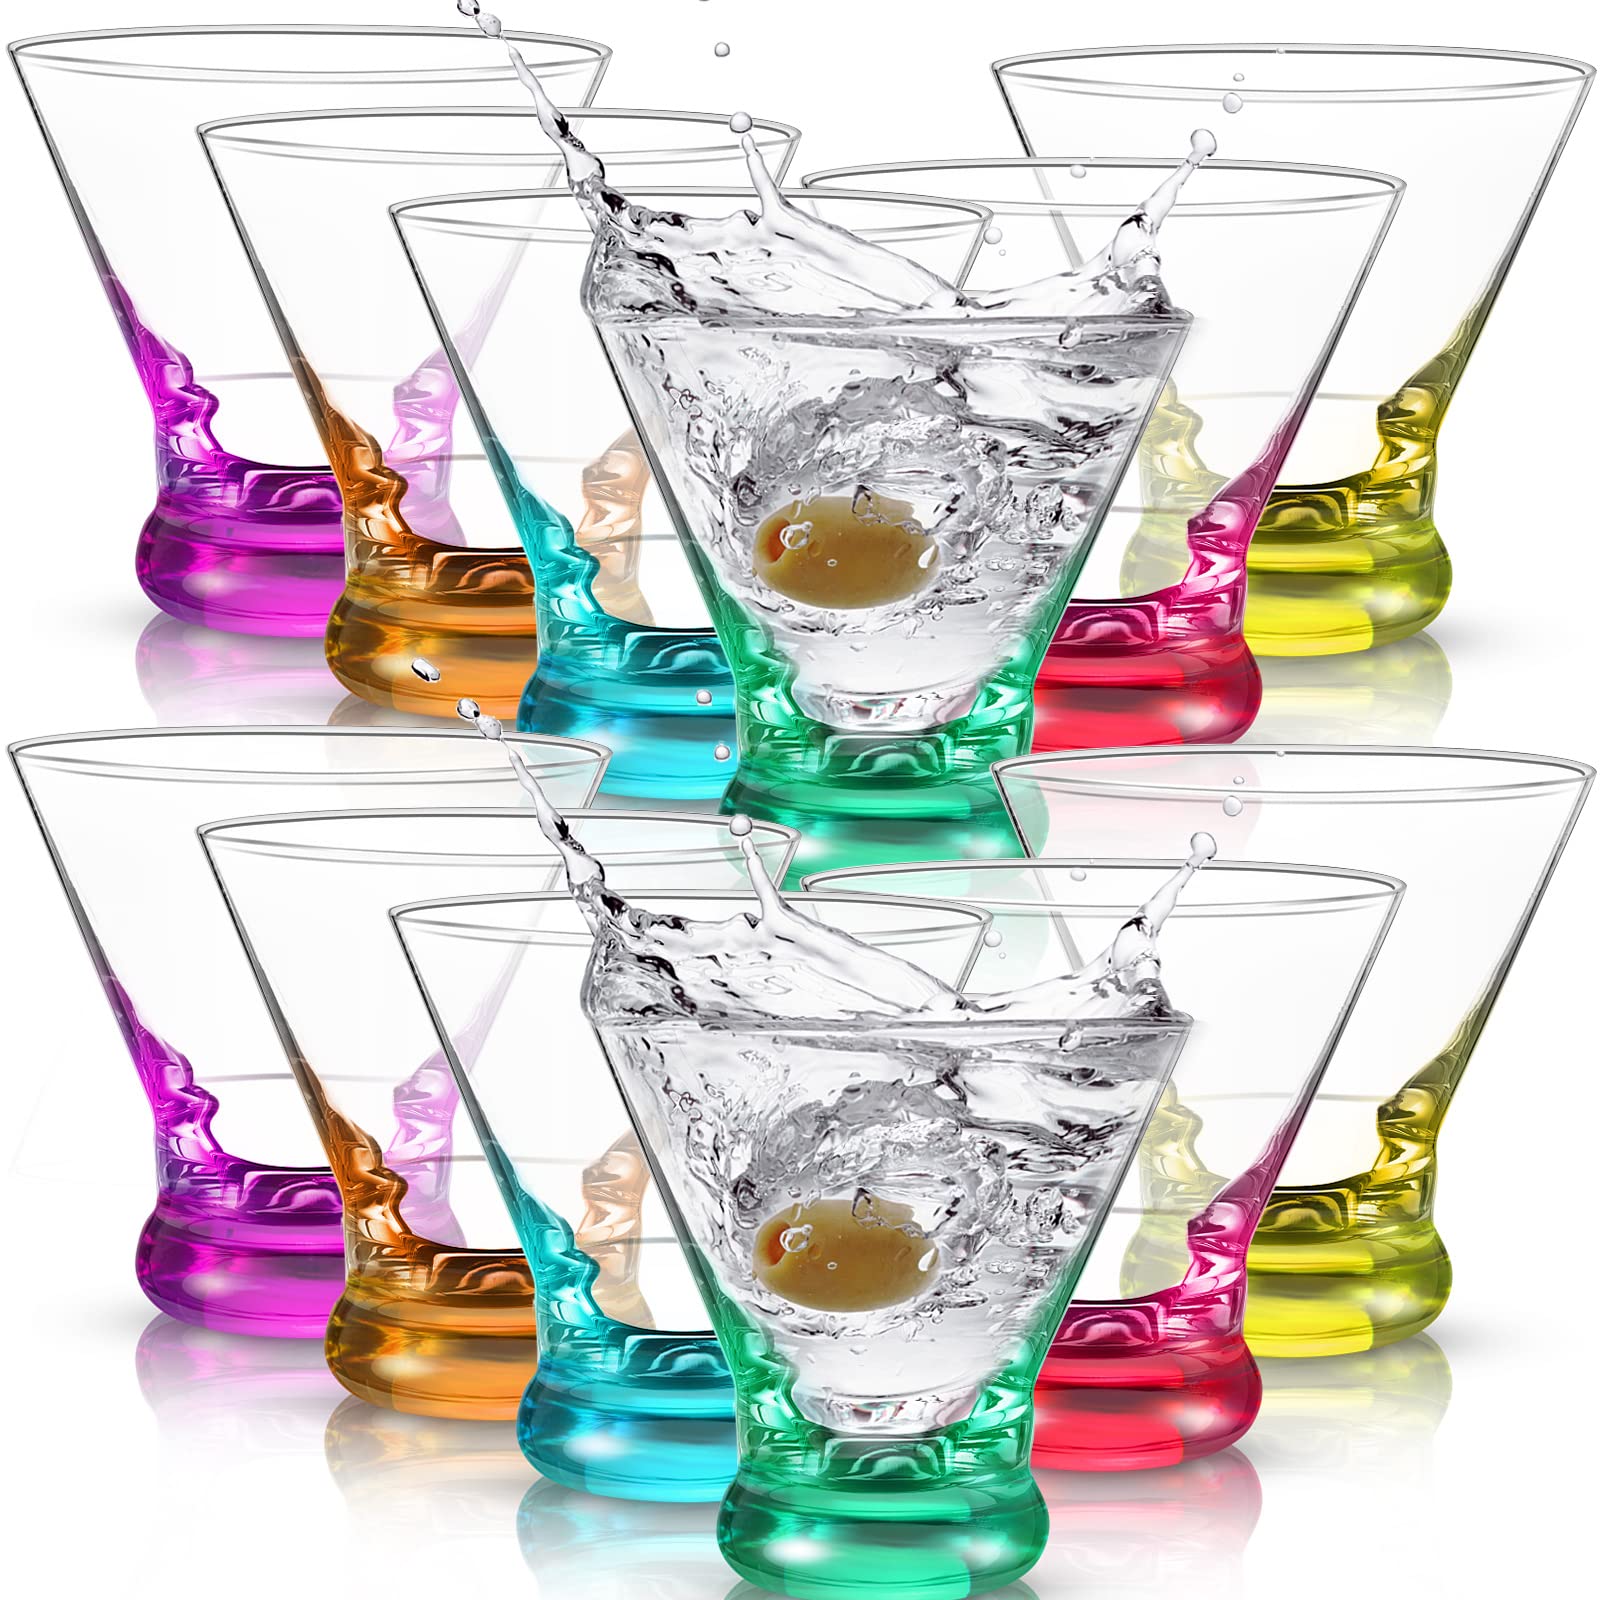 Martini Glasses Colorful Set of 12 Stemless 8 Ounces Cocktail Glasses with Colored Base Cups for Margaritas Home Bar Glassware Colorful Drinking Glasses for Martini Lovers Gift Bar Dessert Kitchen